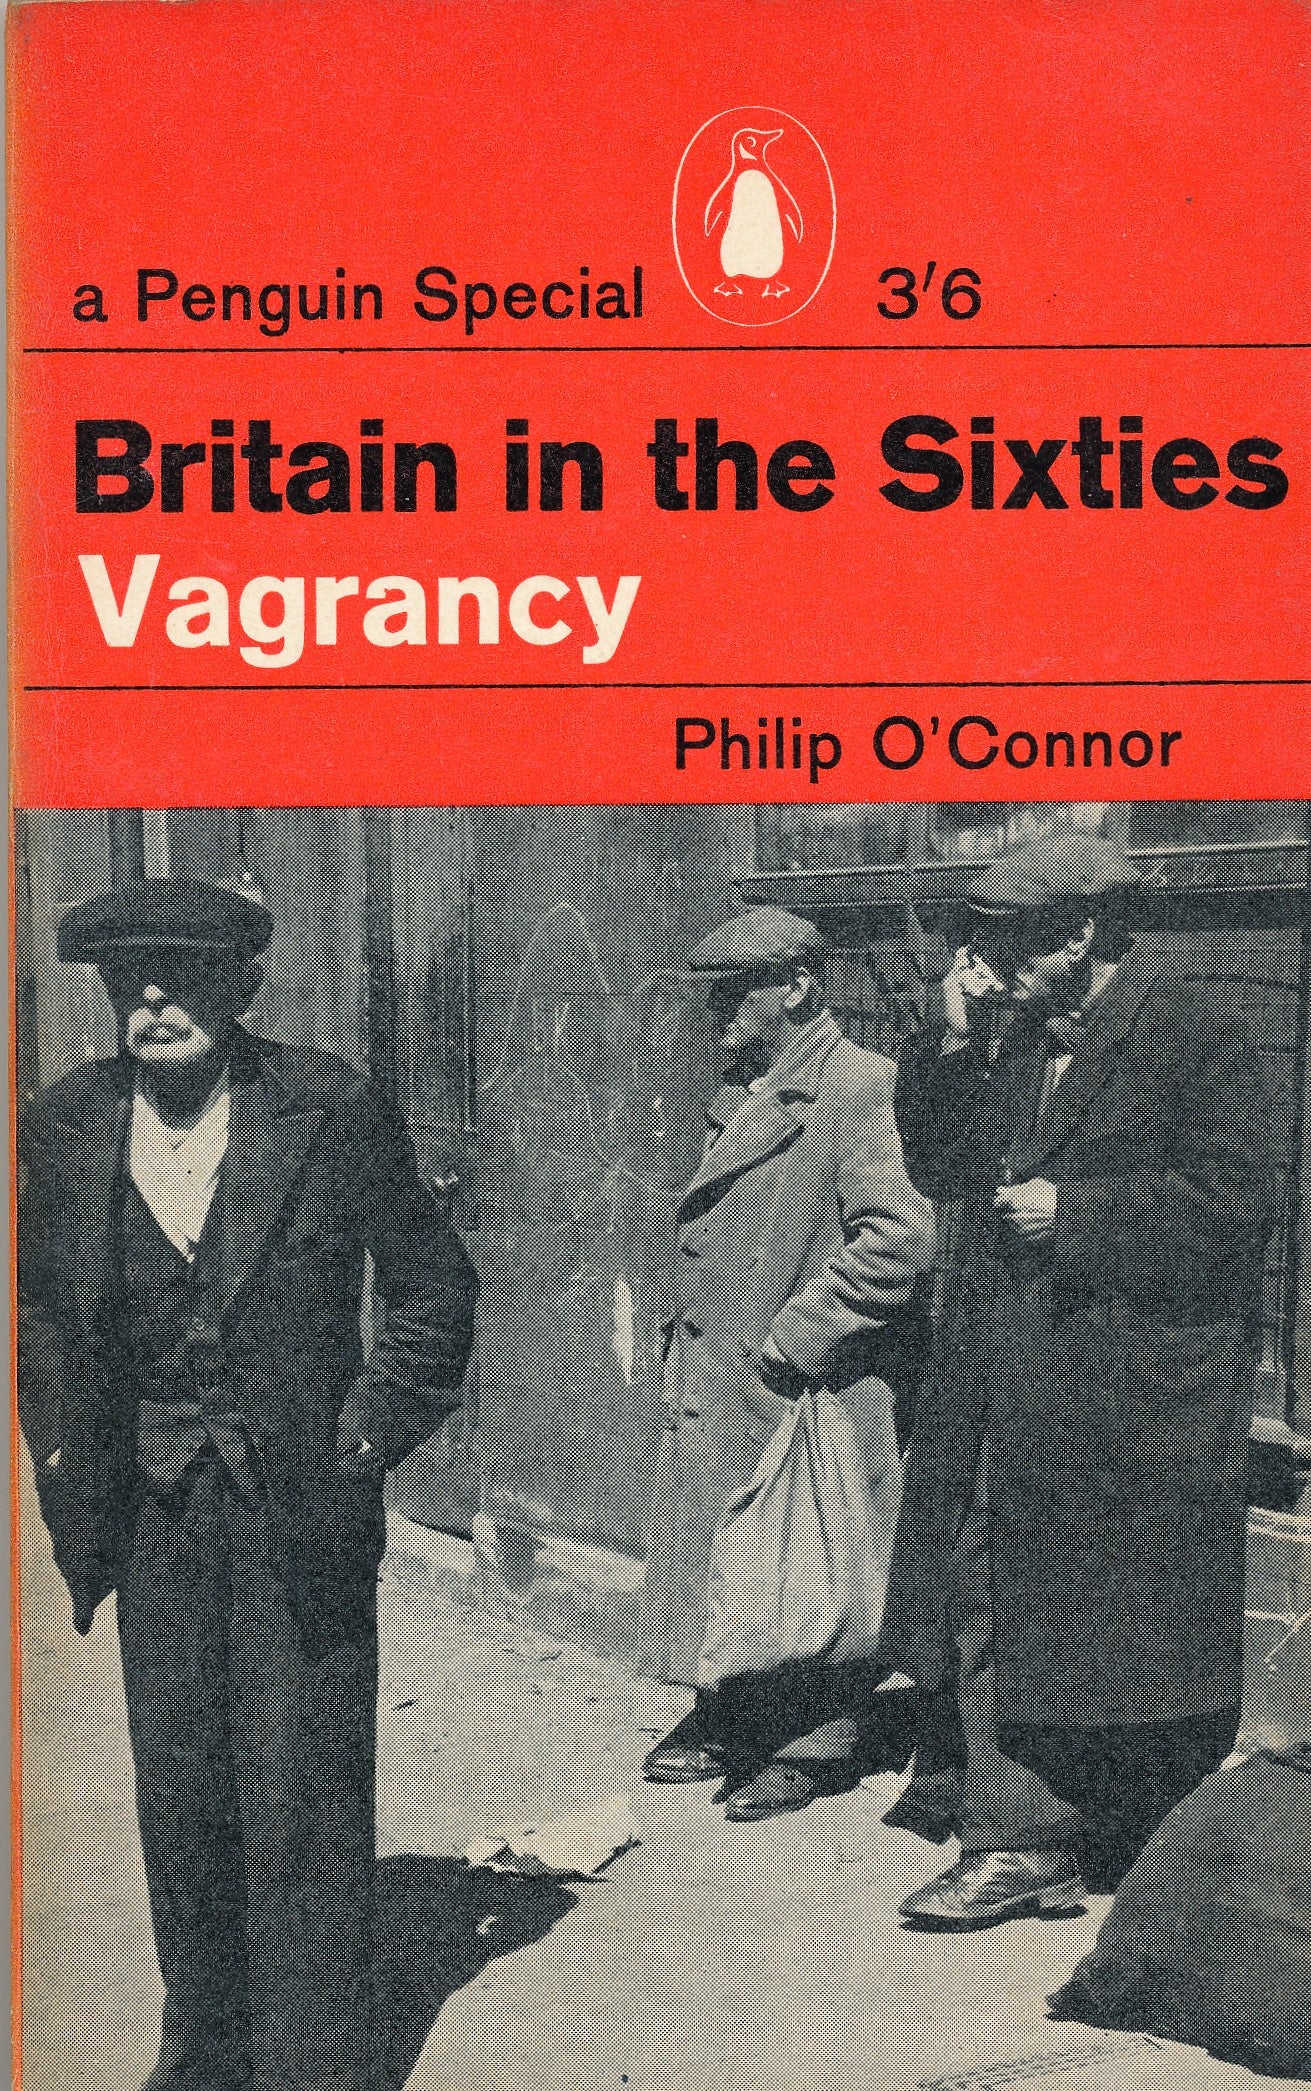 With its distinctive red cover, Vagrancy cost three shillings and six pennies